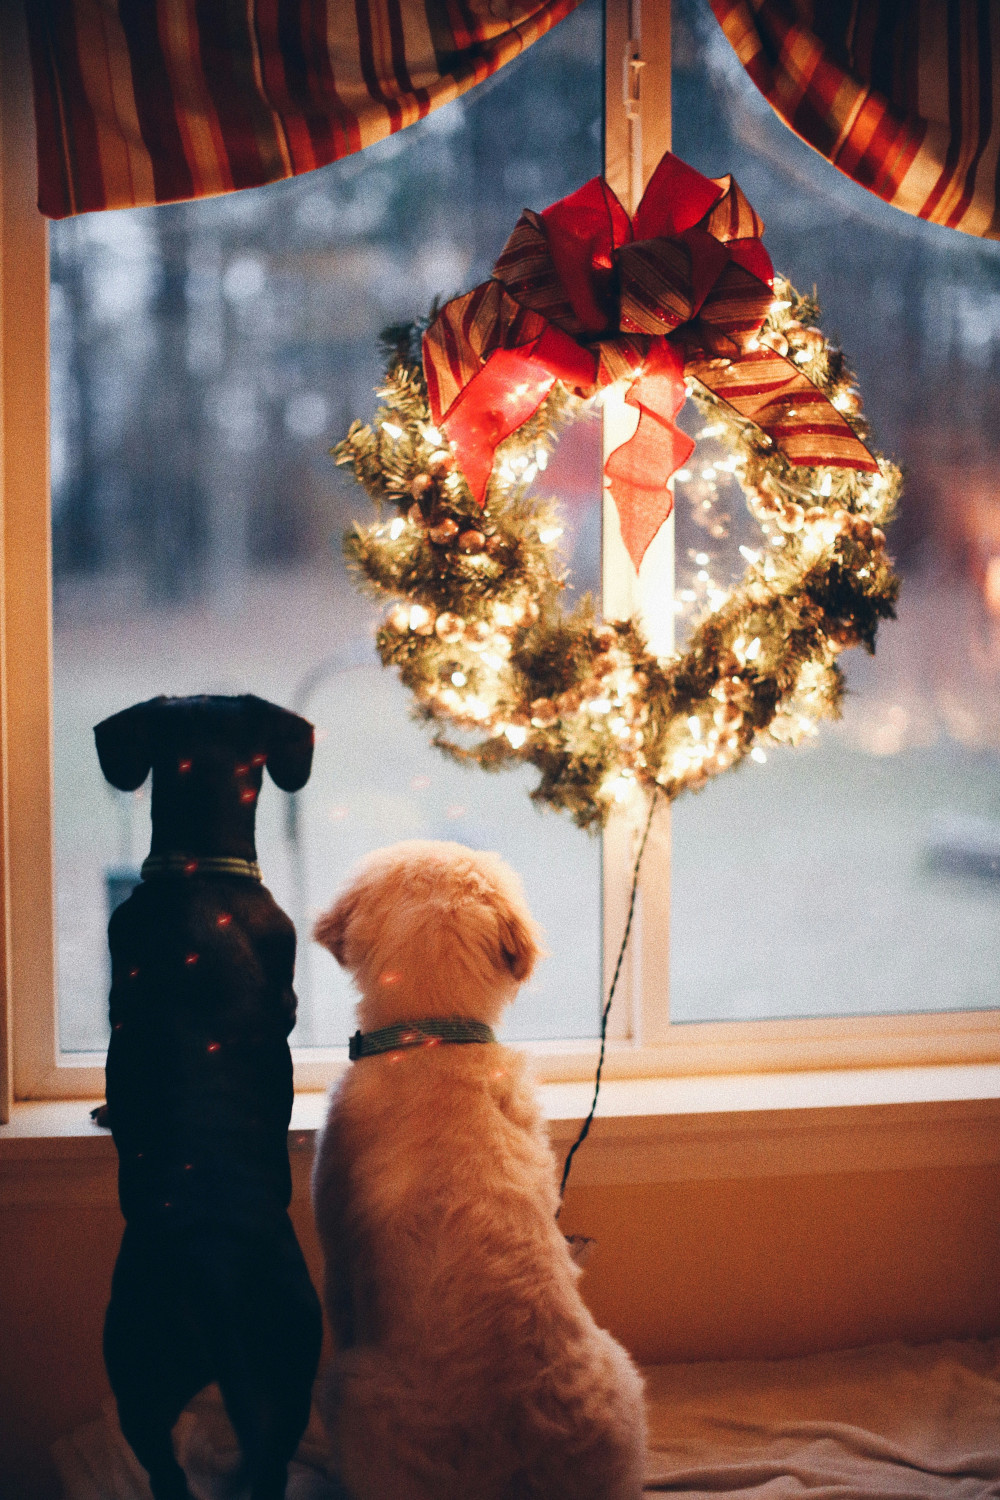 Edible Decorations Can Make Your Dog Sick